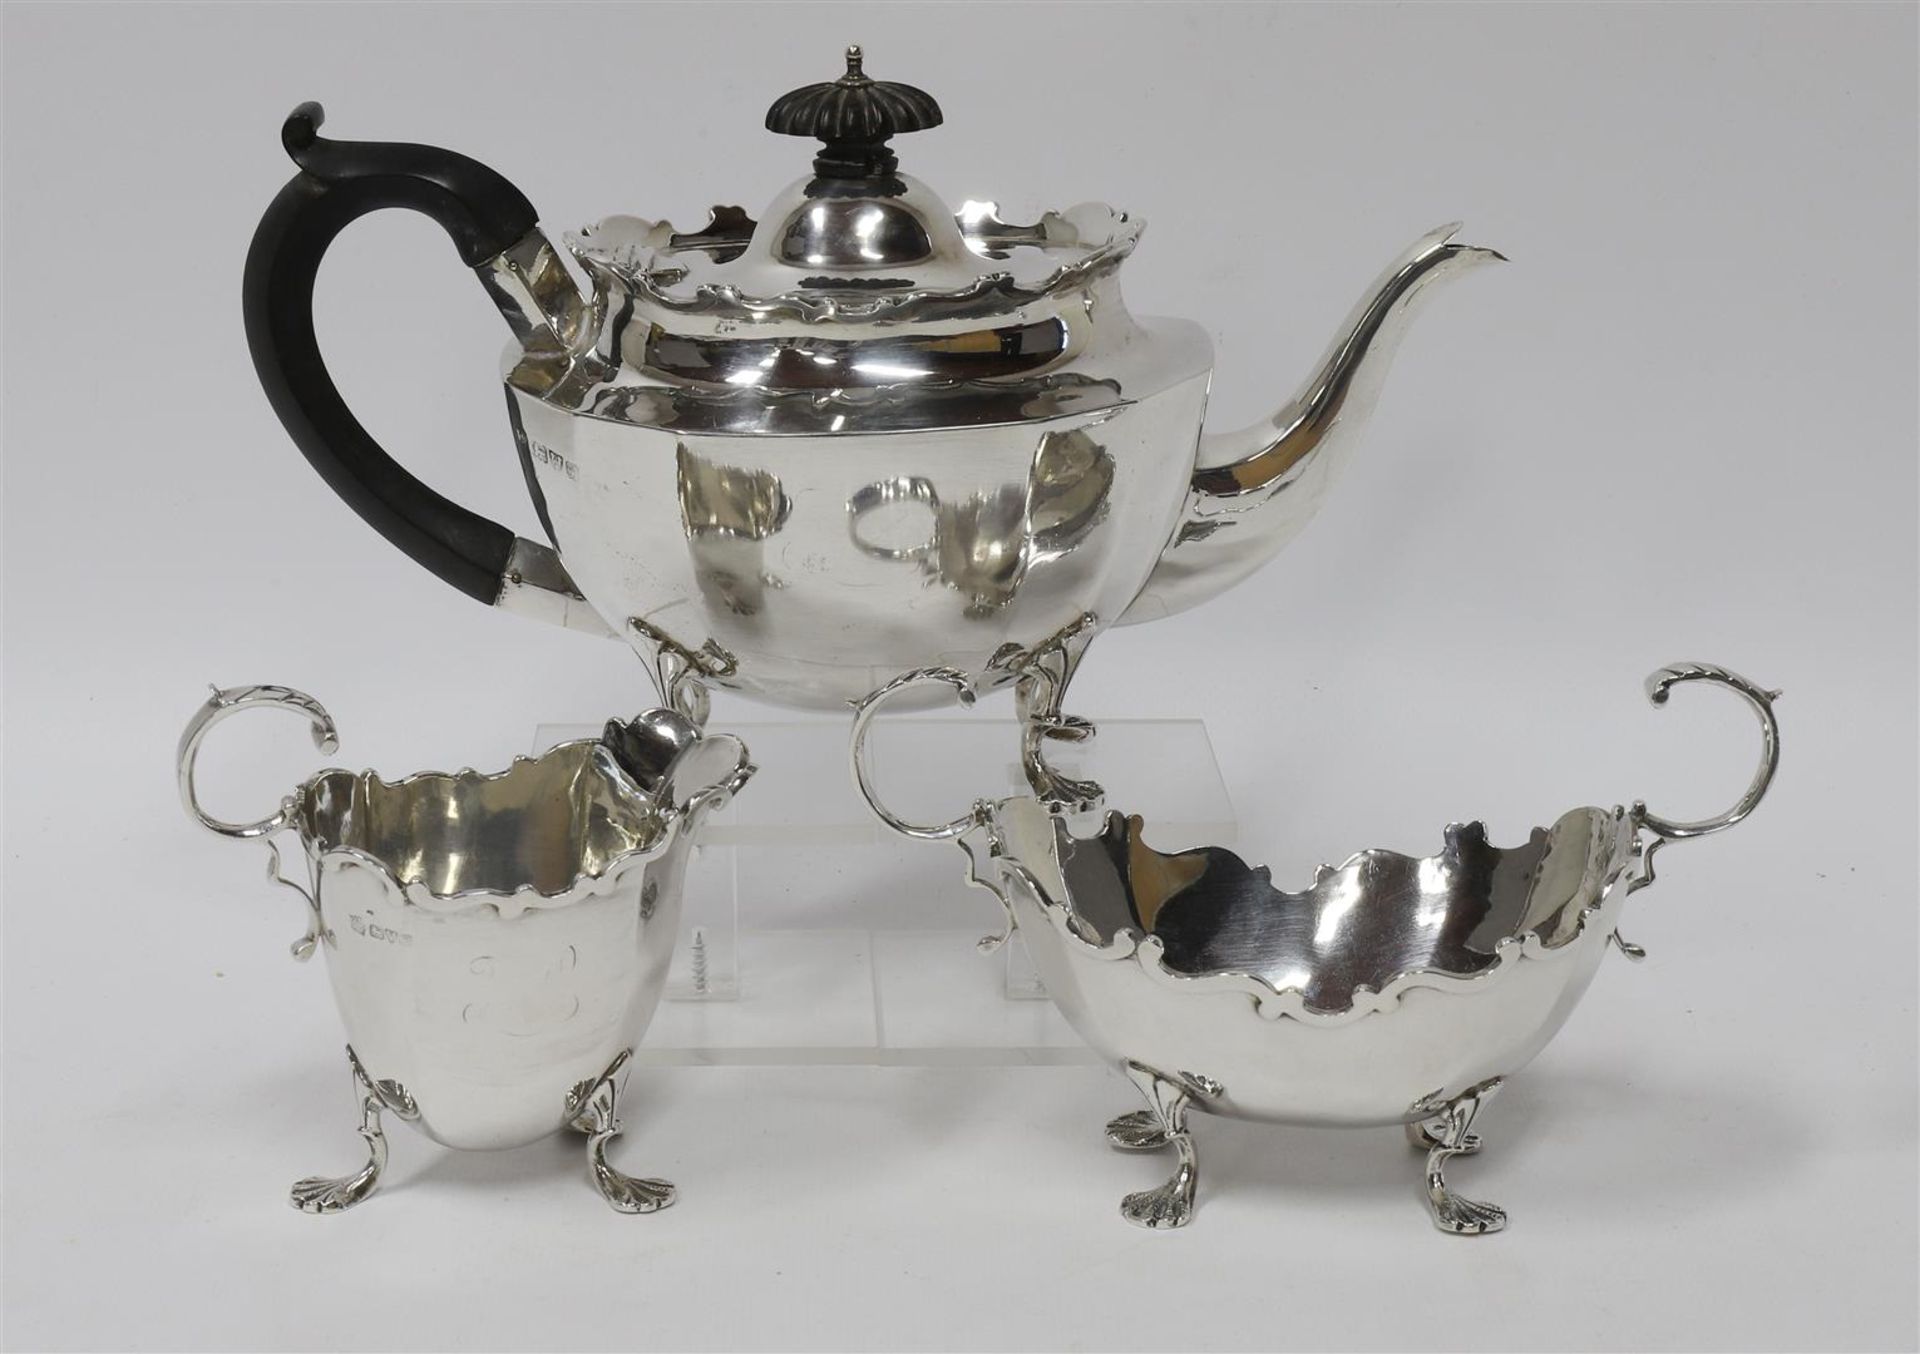 A silver teapot with ebony handle, England, Chester, 1902.